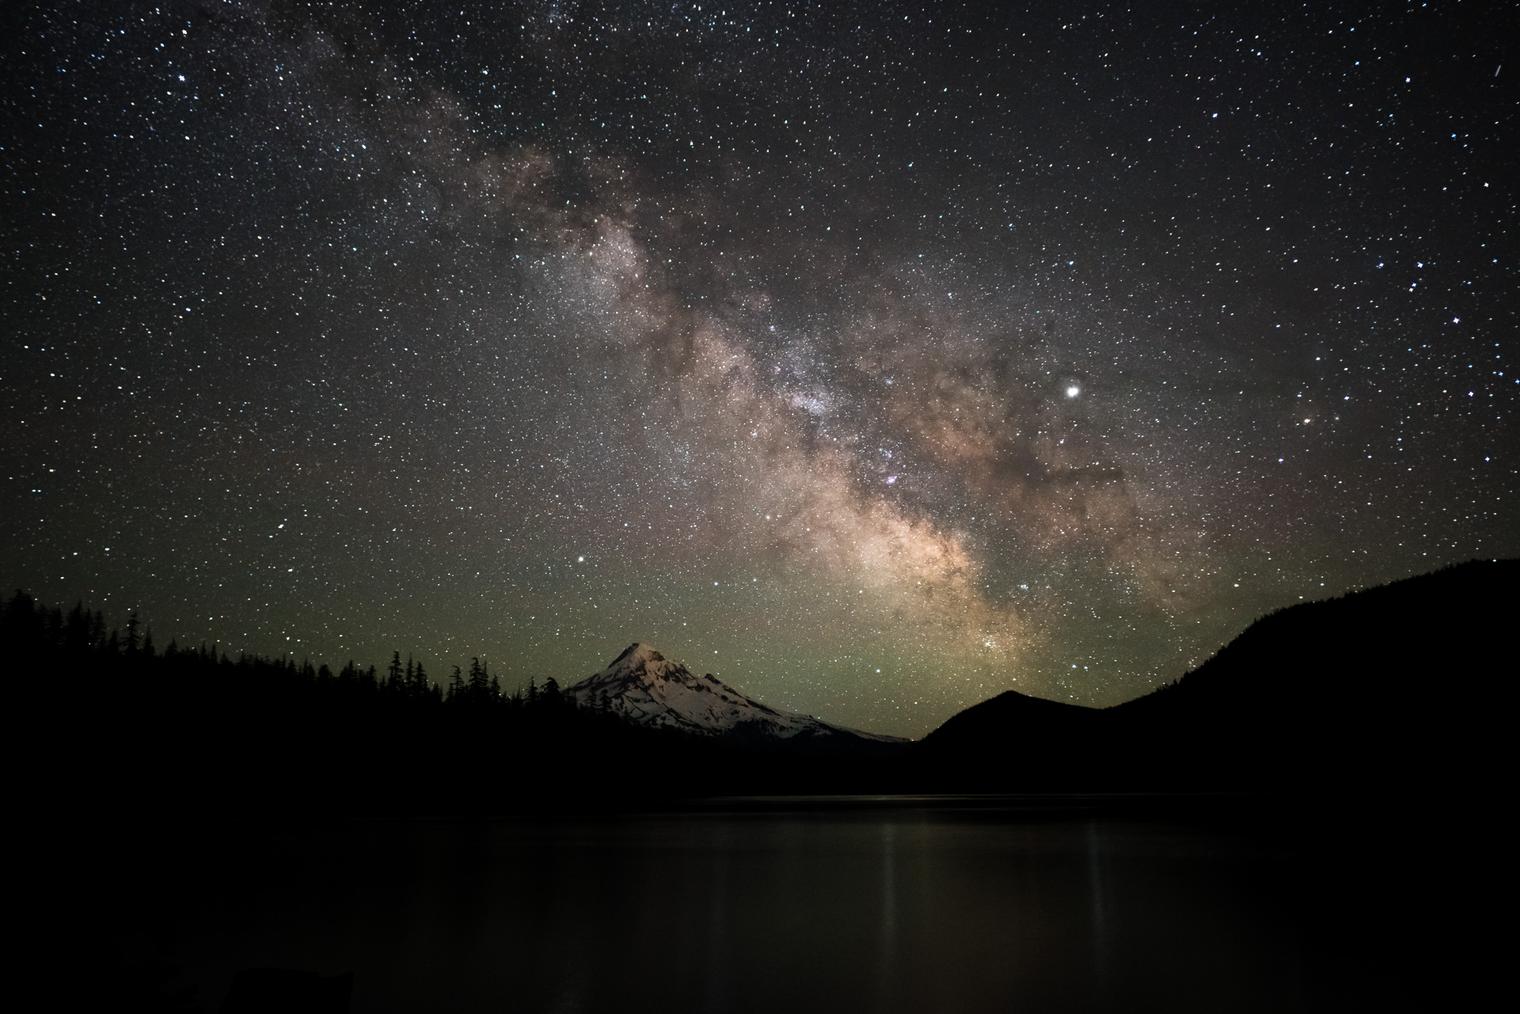 Lightroom Presets for Astro Photography (Milky Way and Lake)